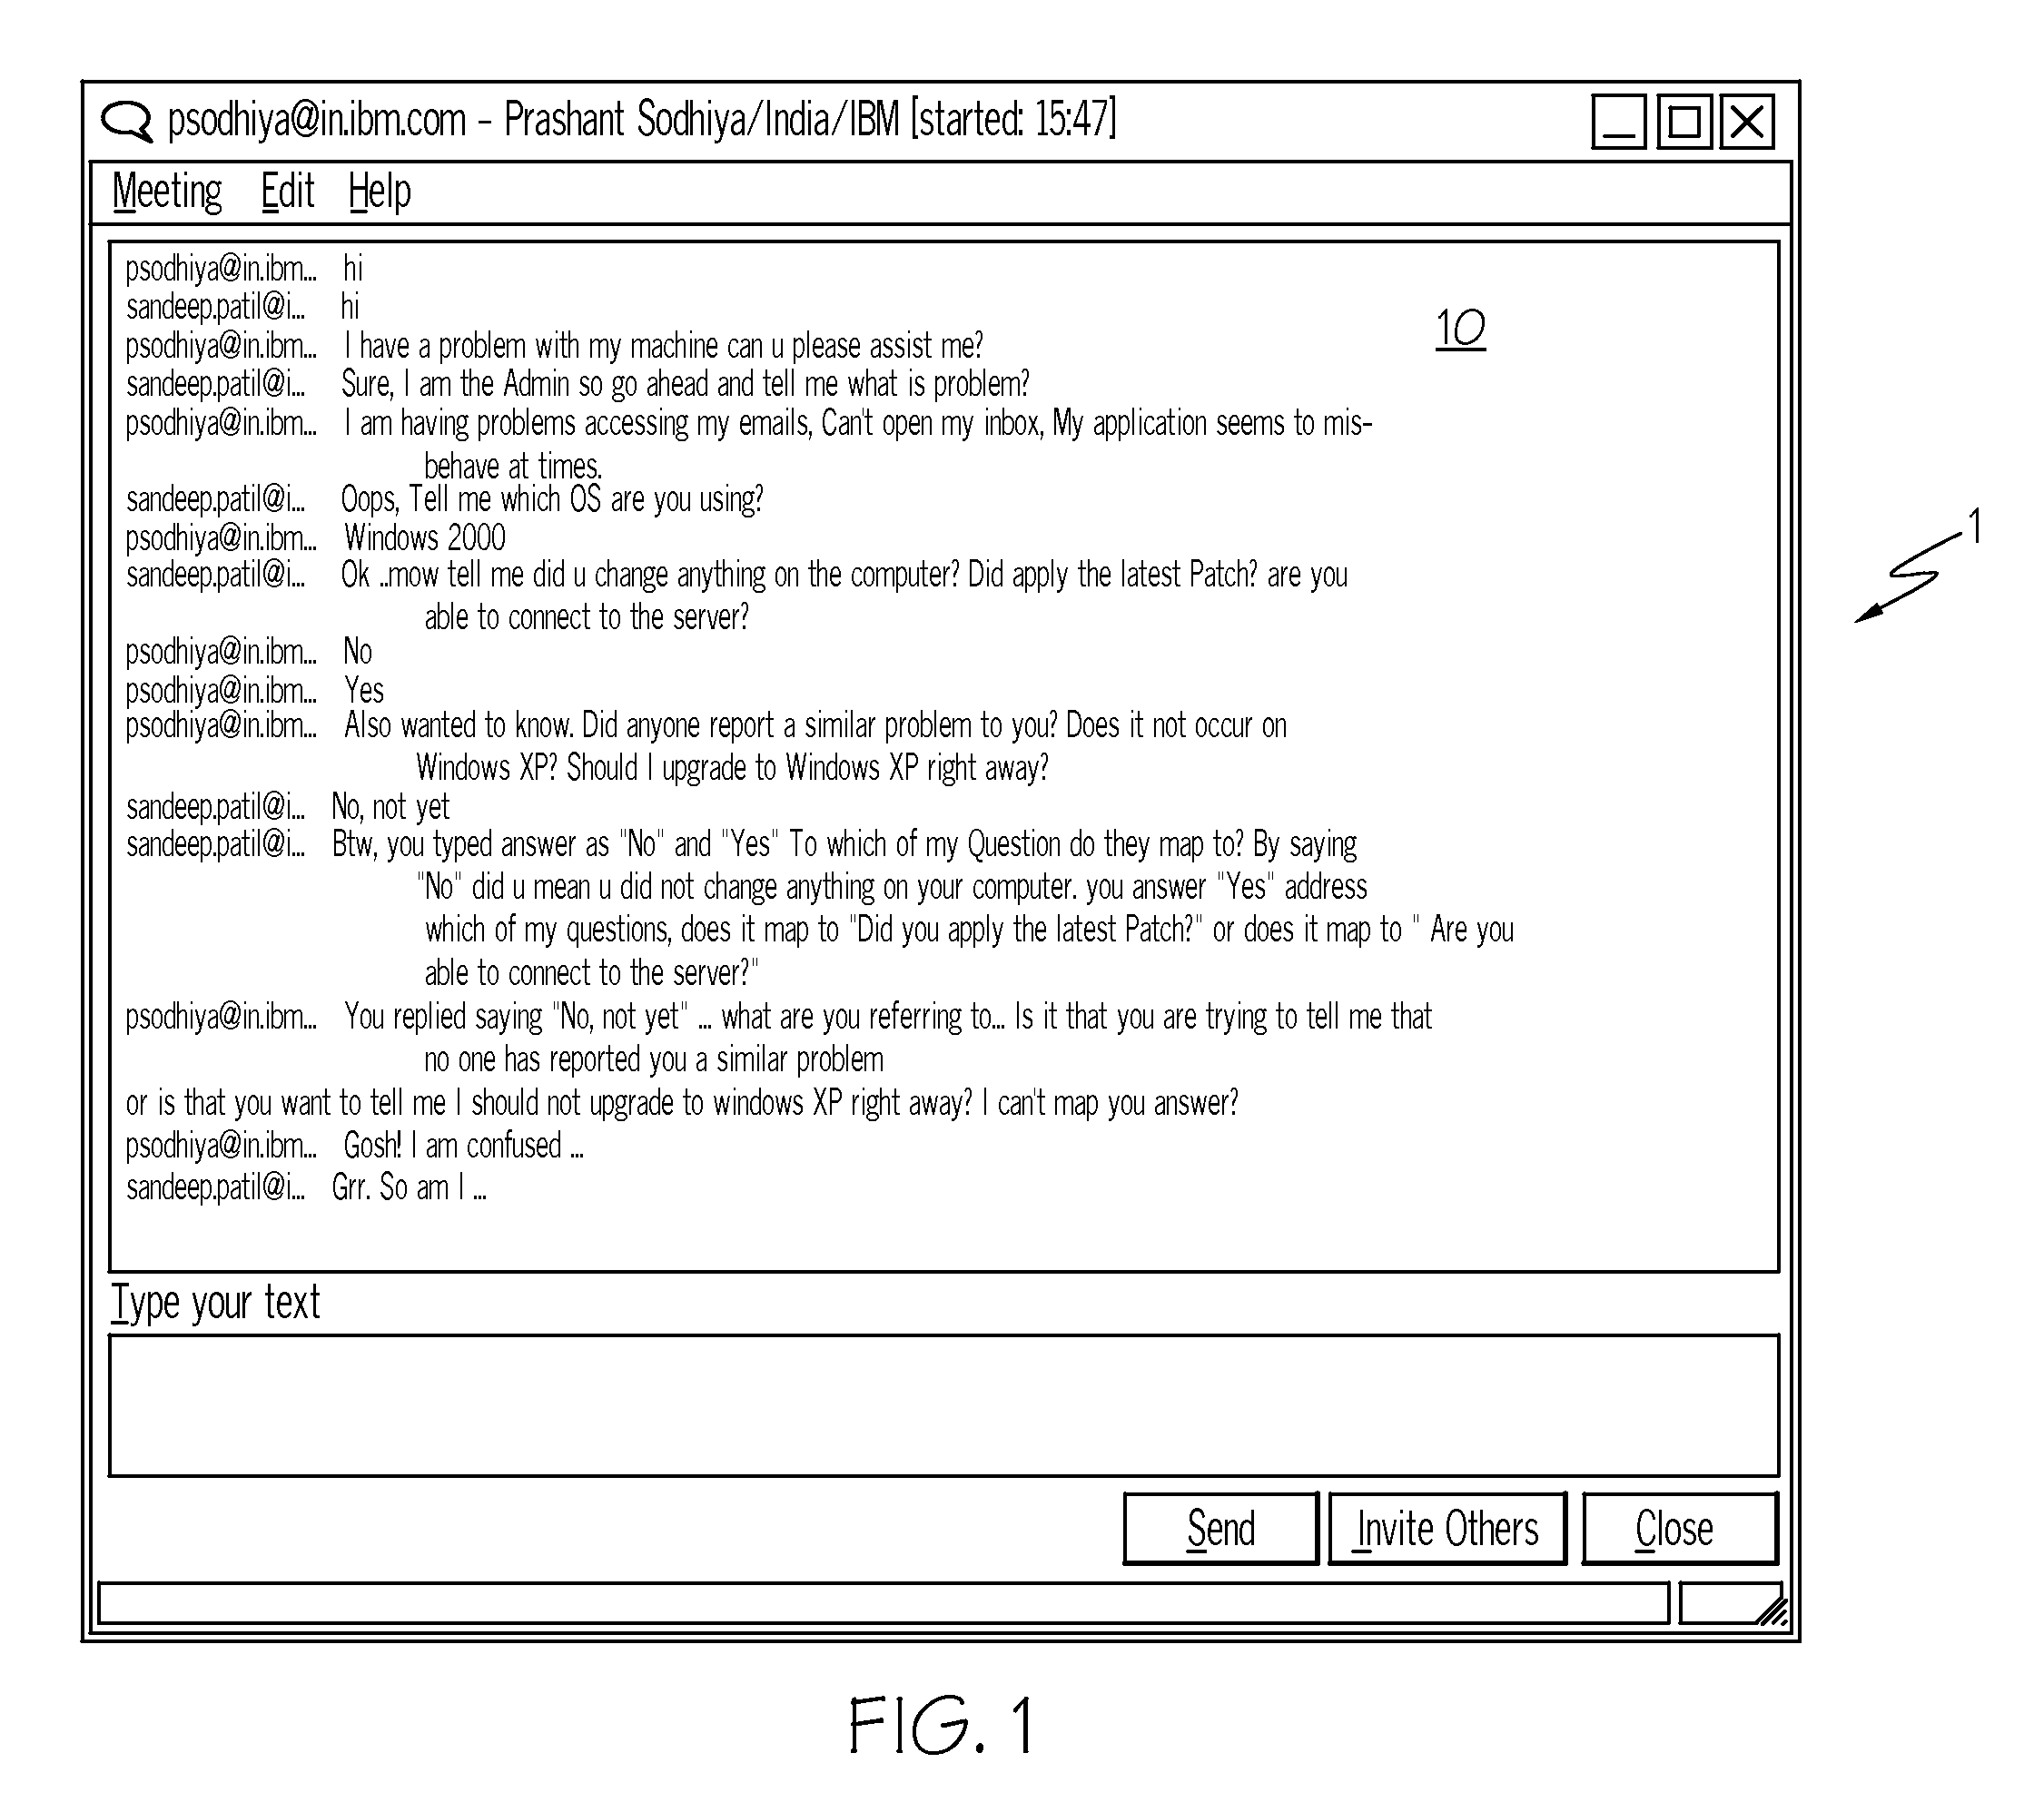 Method and system for enhancing communication with instant messenger/chat computer software applications